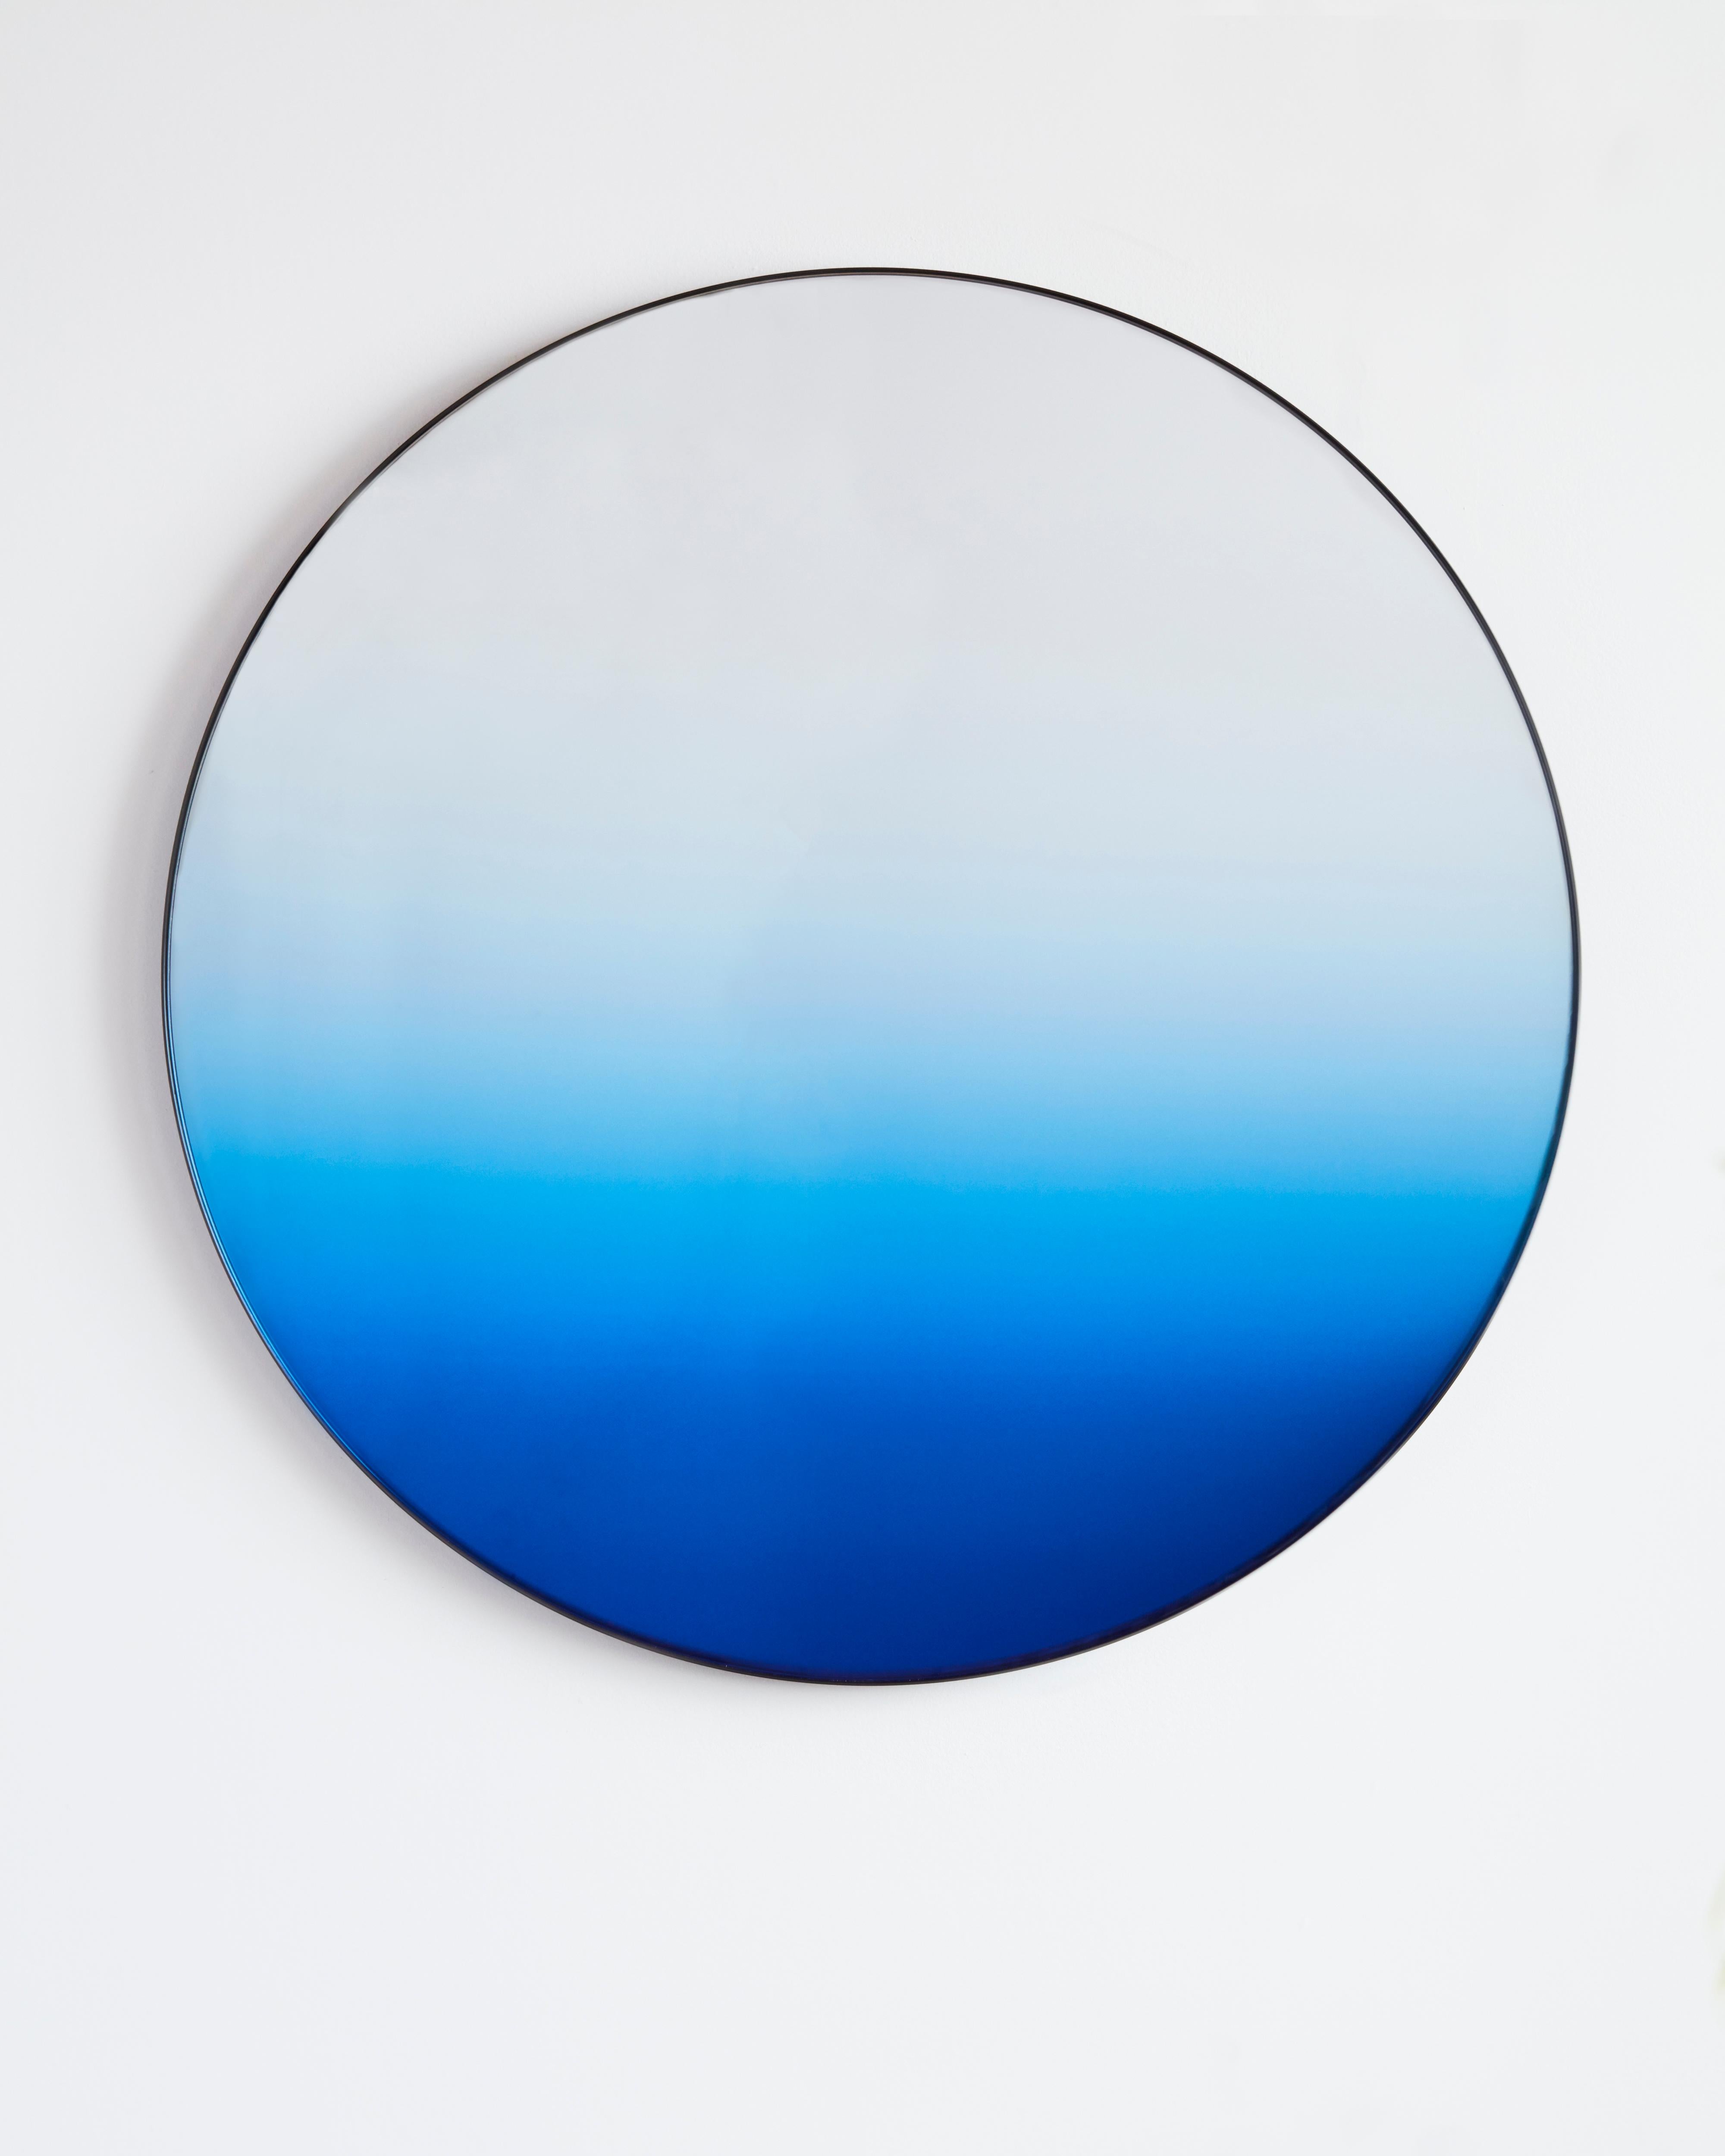 Gradient mirror by Phillip Jividen
Dimensions: D 66 cm
Materials: Glass, Aluminum
Other dimensions available. 

Inspired by the earth’s sky the Gradient Mirror is a minimalist design that integrates color into a mirror surface to create an